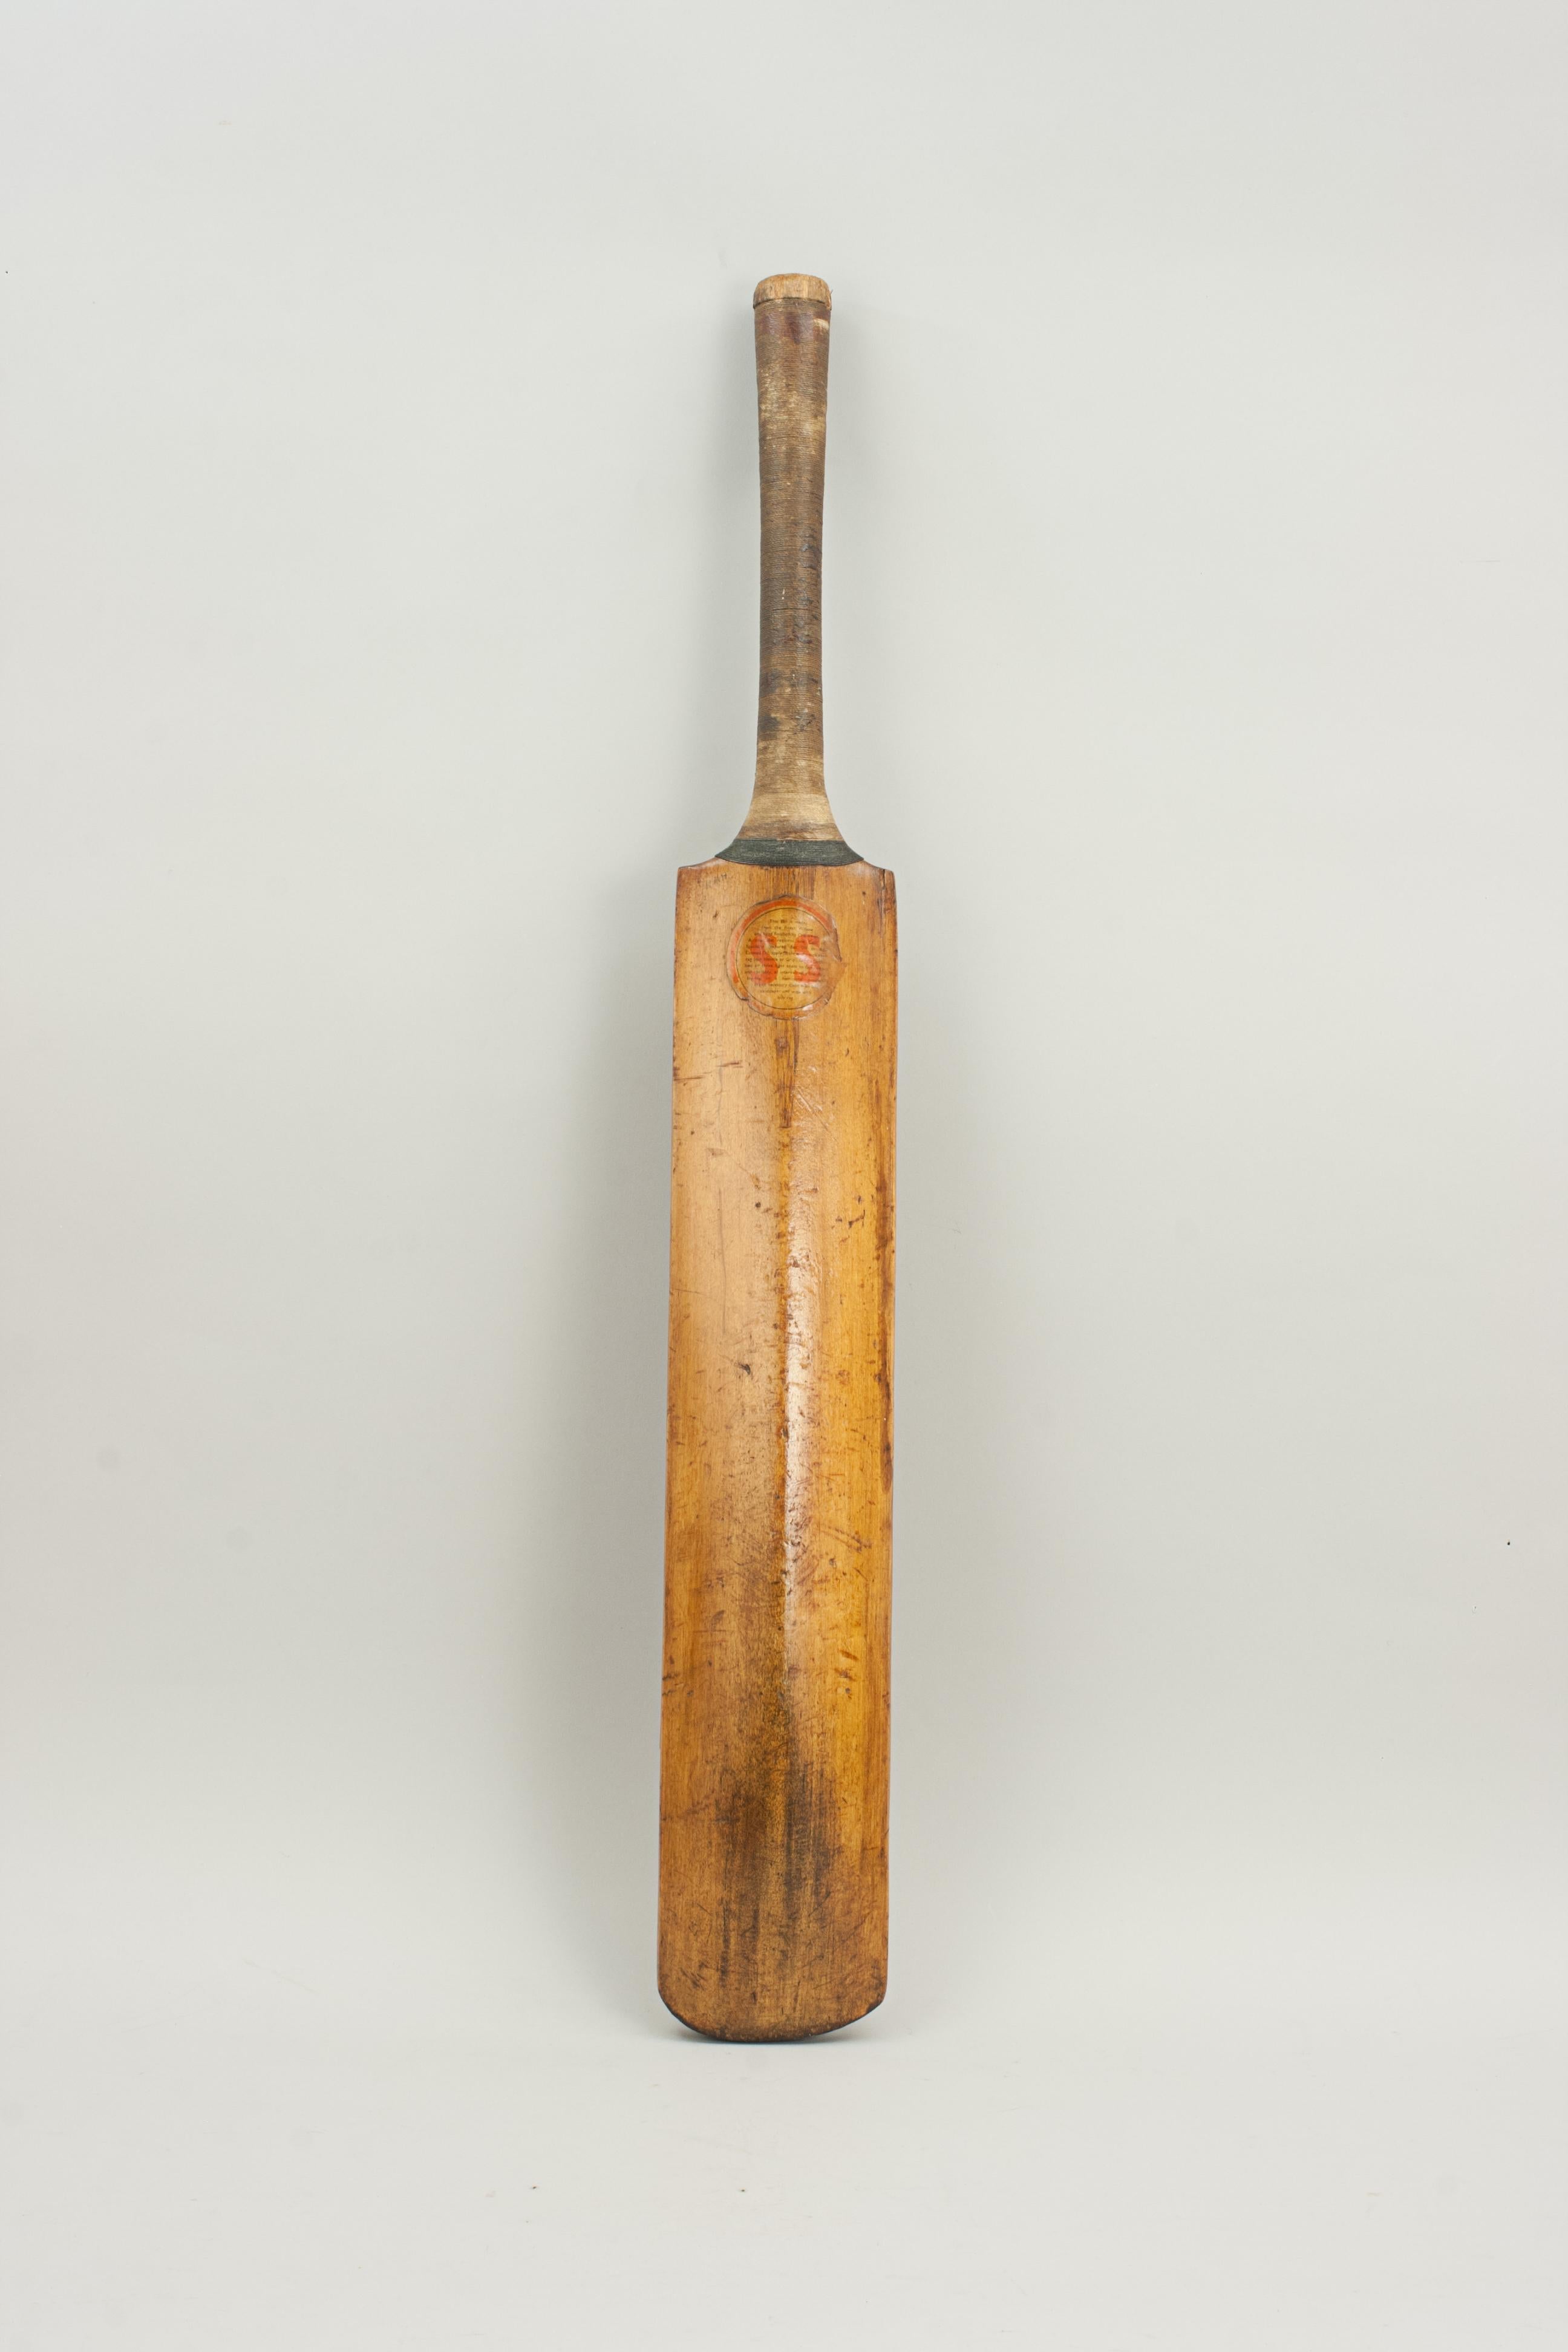 Wellington Cricket bat.
A good willow cricket bat stamped 'TRADE MARK WELLINGTON' with the Wellington trade mark on the shoulders of the bat. The embossing is very faint, there are red ball marks on the blade and the handle whipped. The back of the